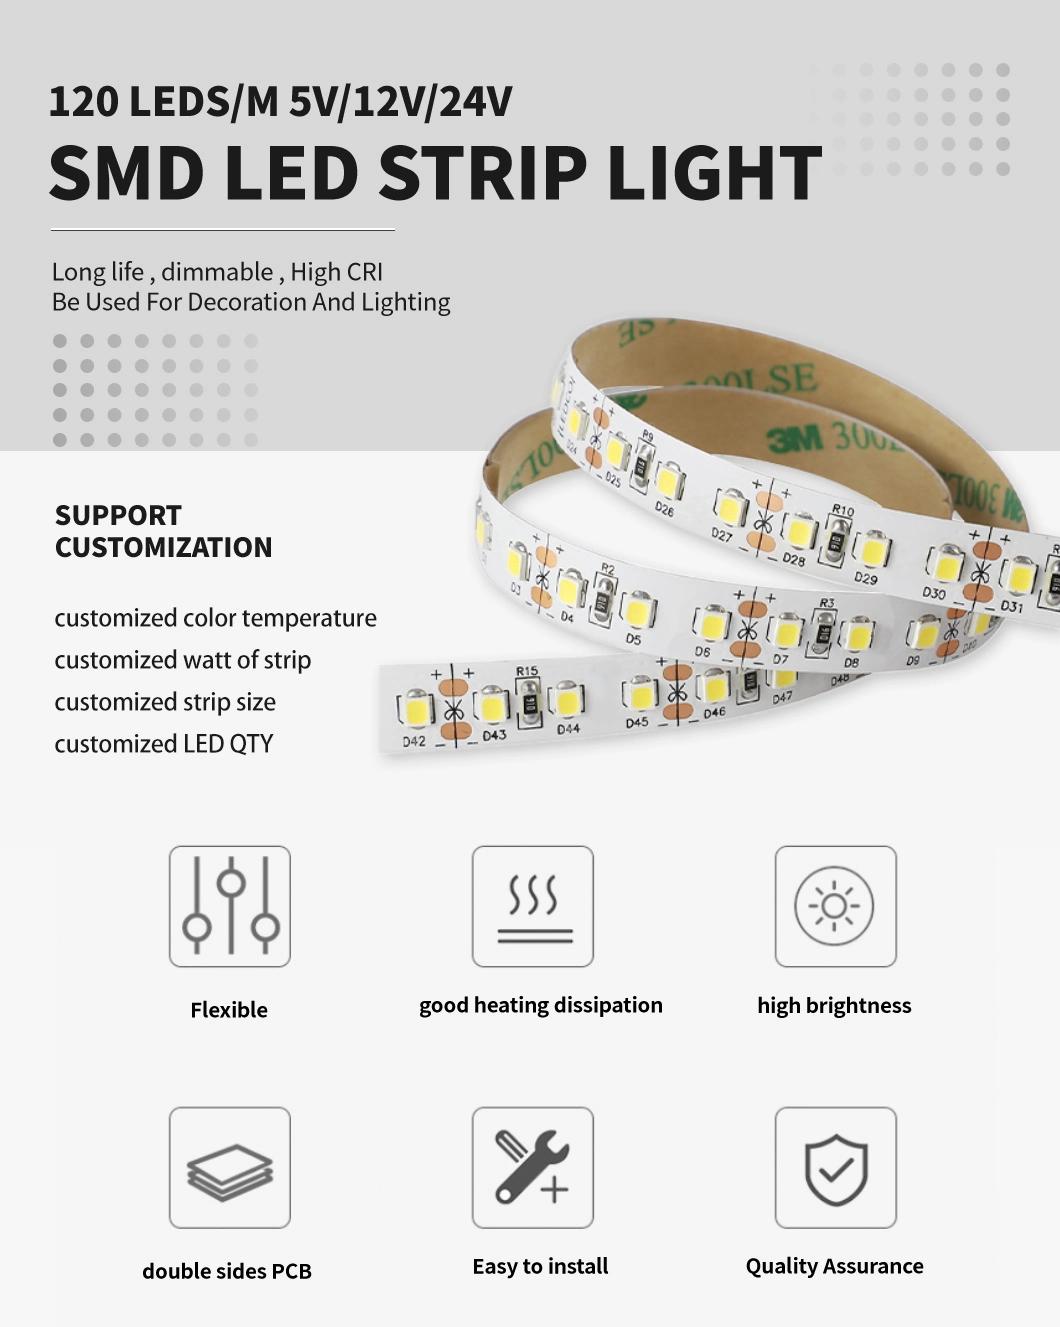 High Bright SMD2835 LED Strip 120LEDs/M 16W/M with IEC/En62471